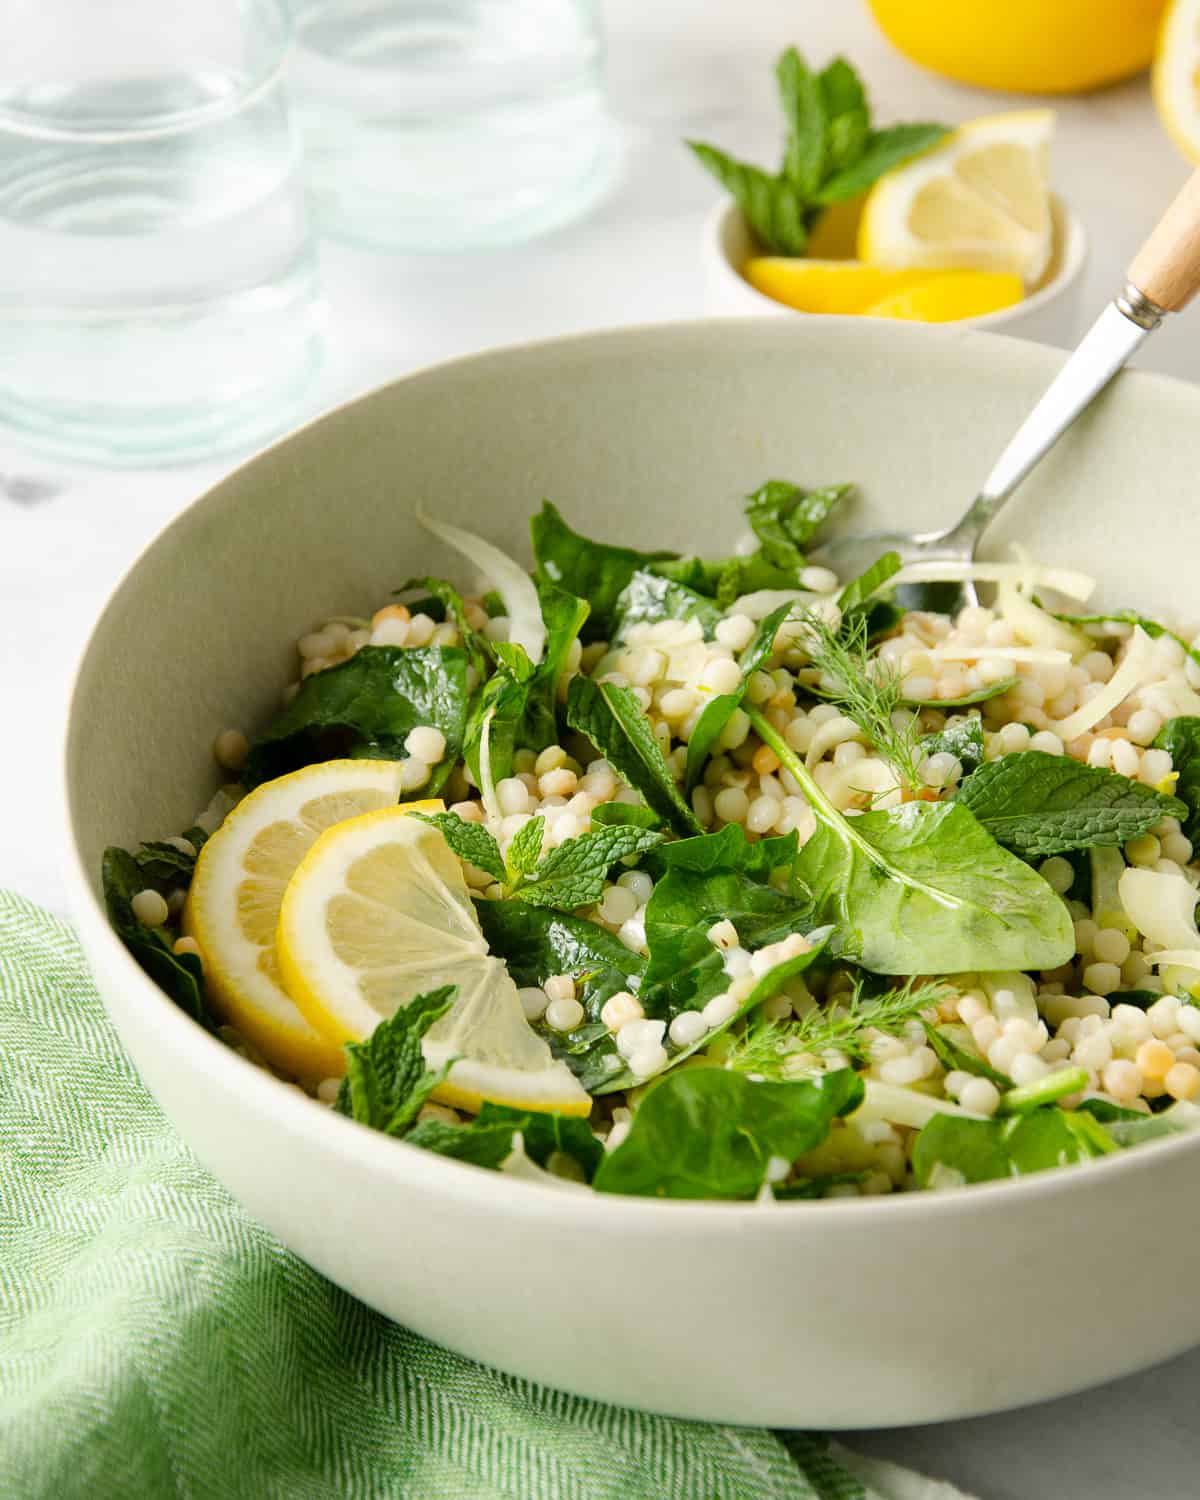 A bowl full of couscous salad topped with spinach, fresh mint, and lemon slices.